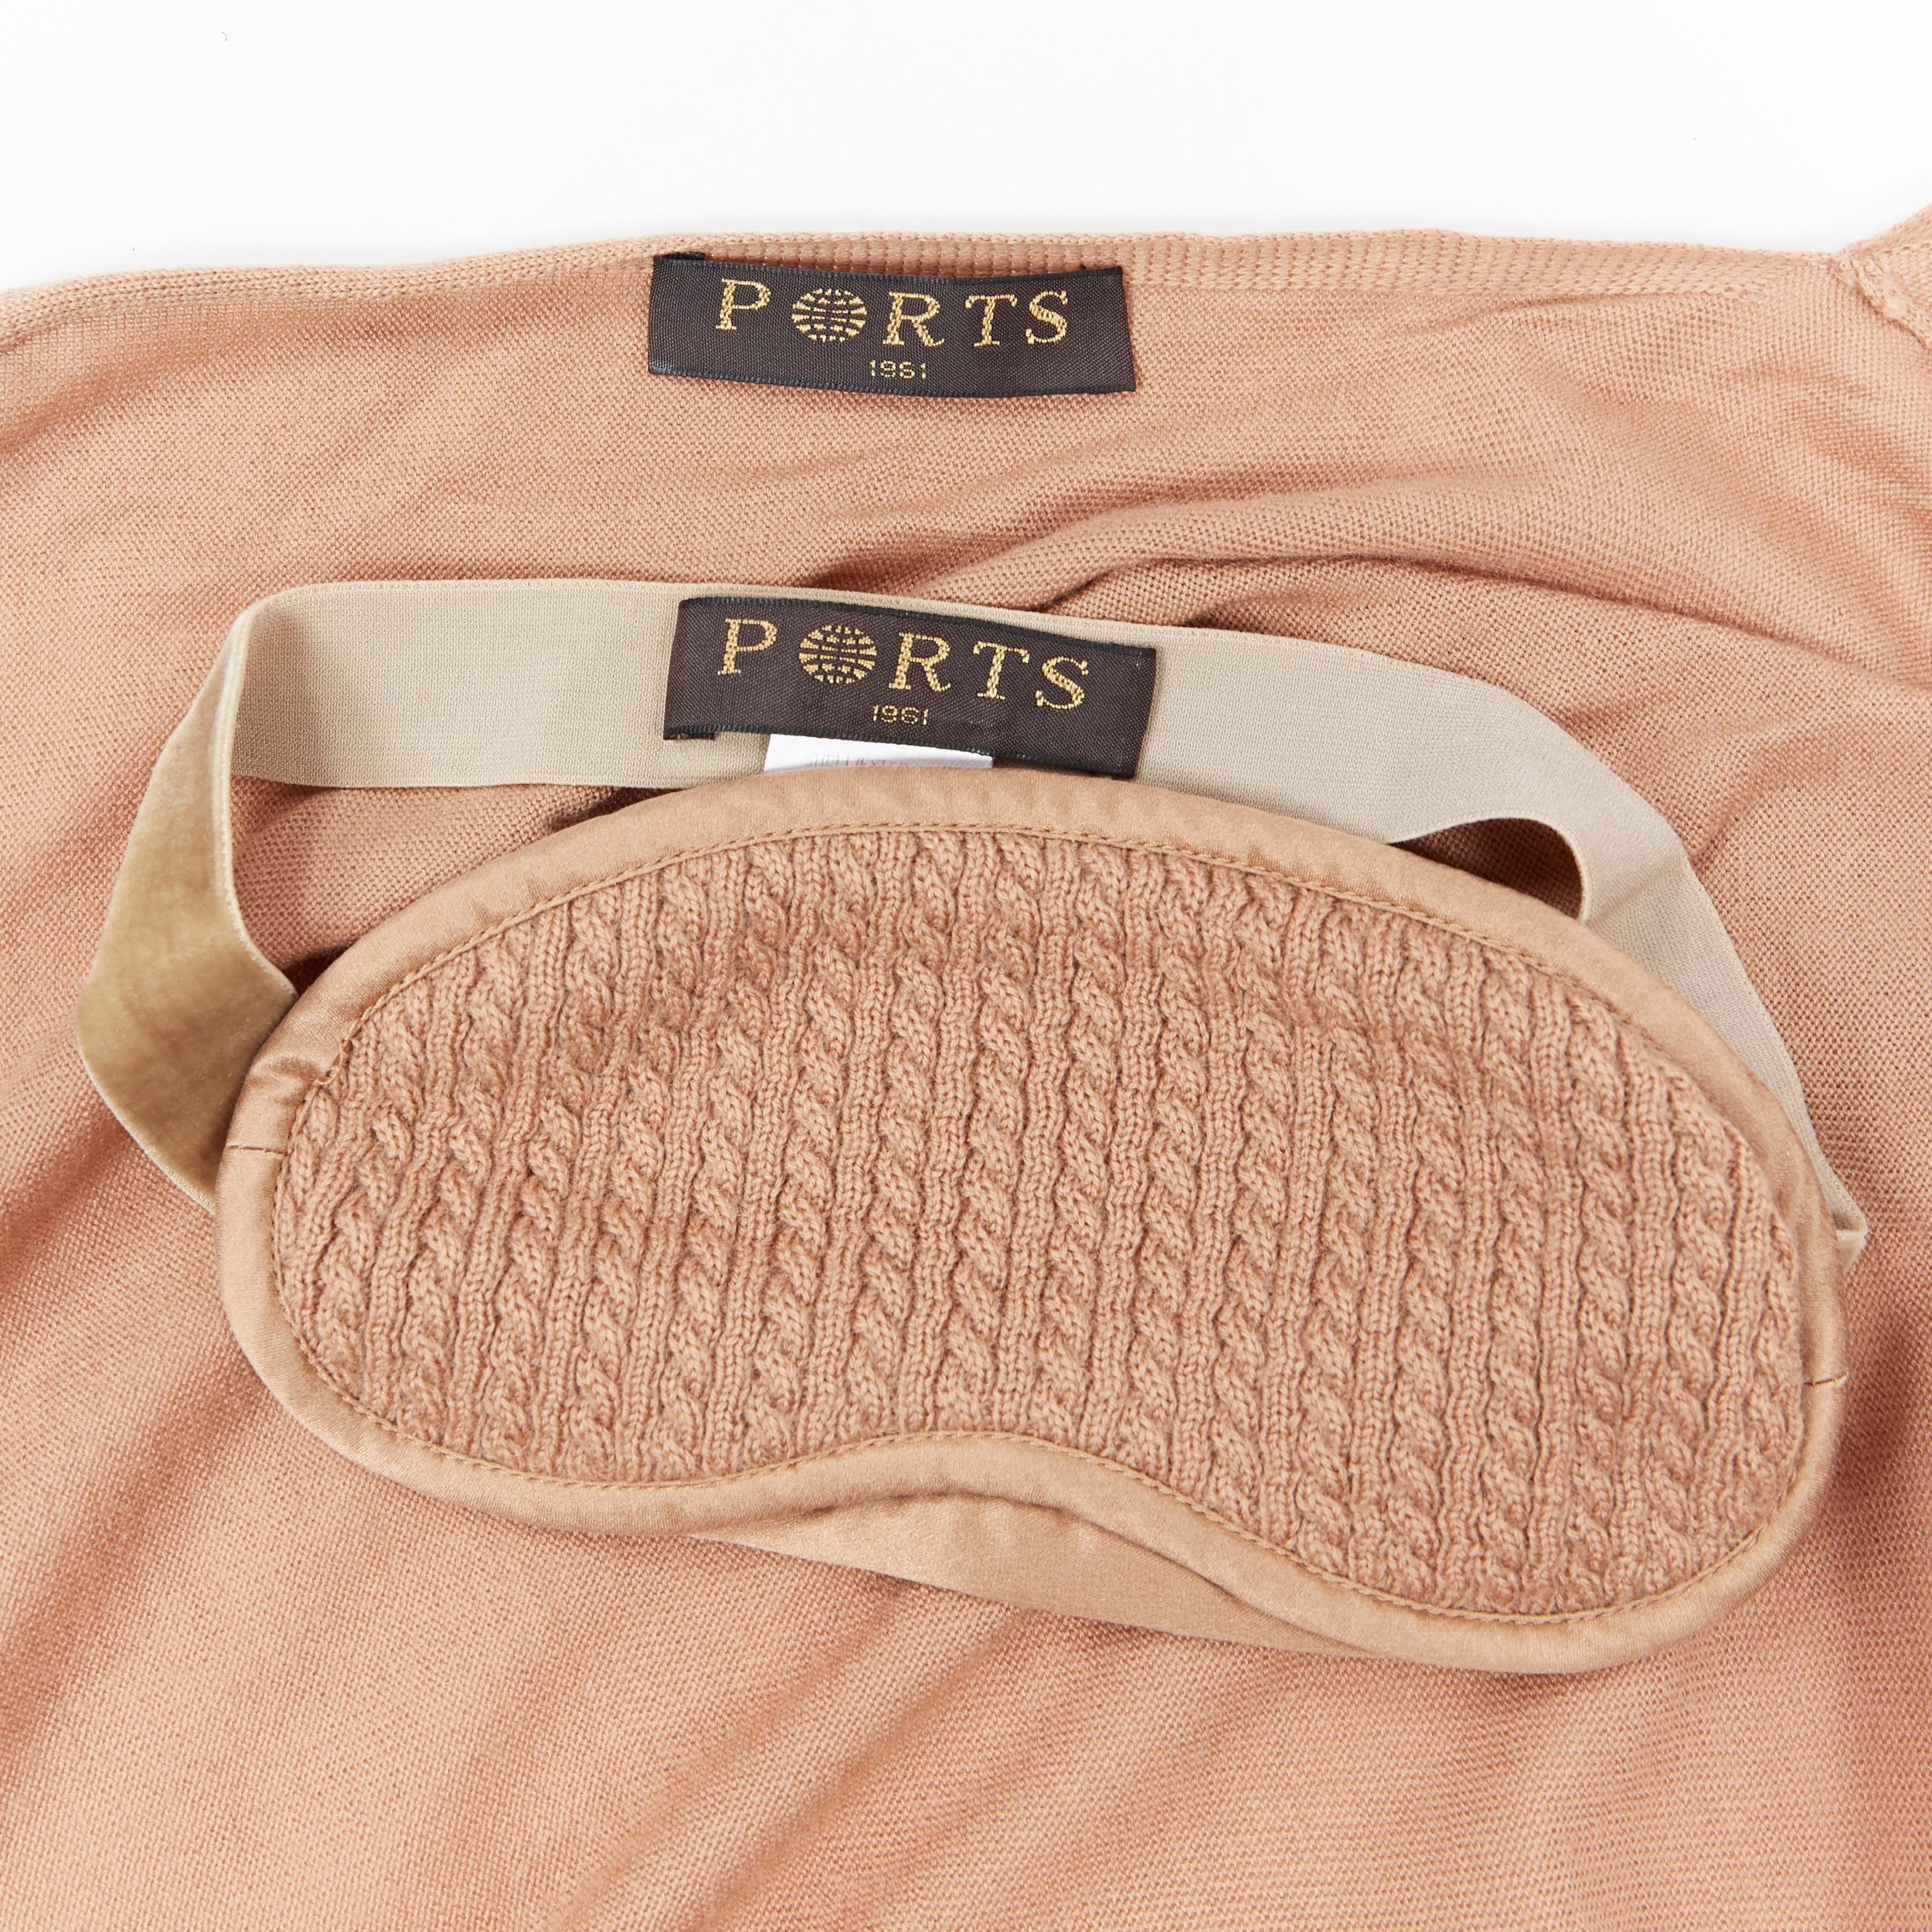 PORTS 1961 merino wool knitted camisole wrap caridgan trouser travel pouch set 7